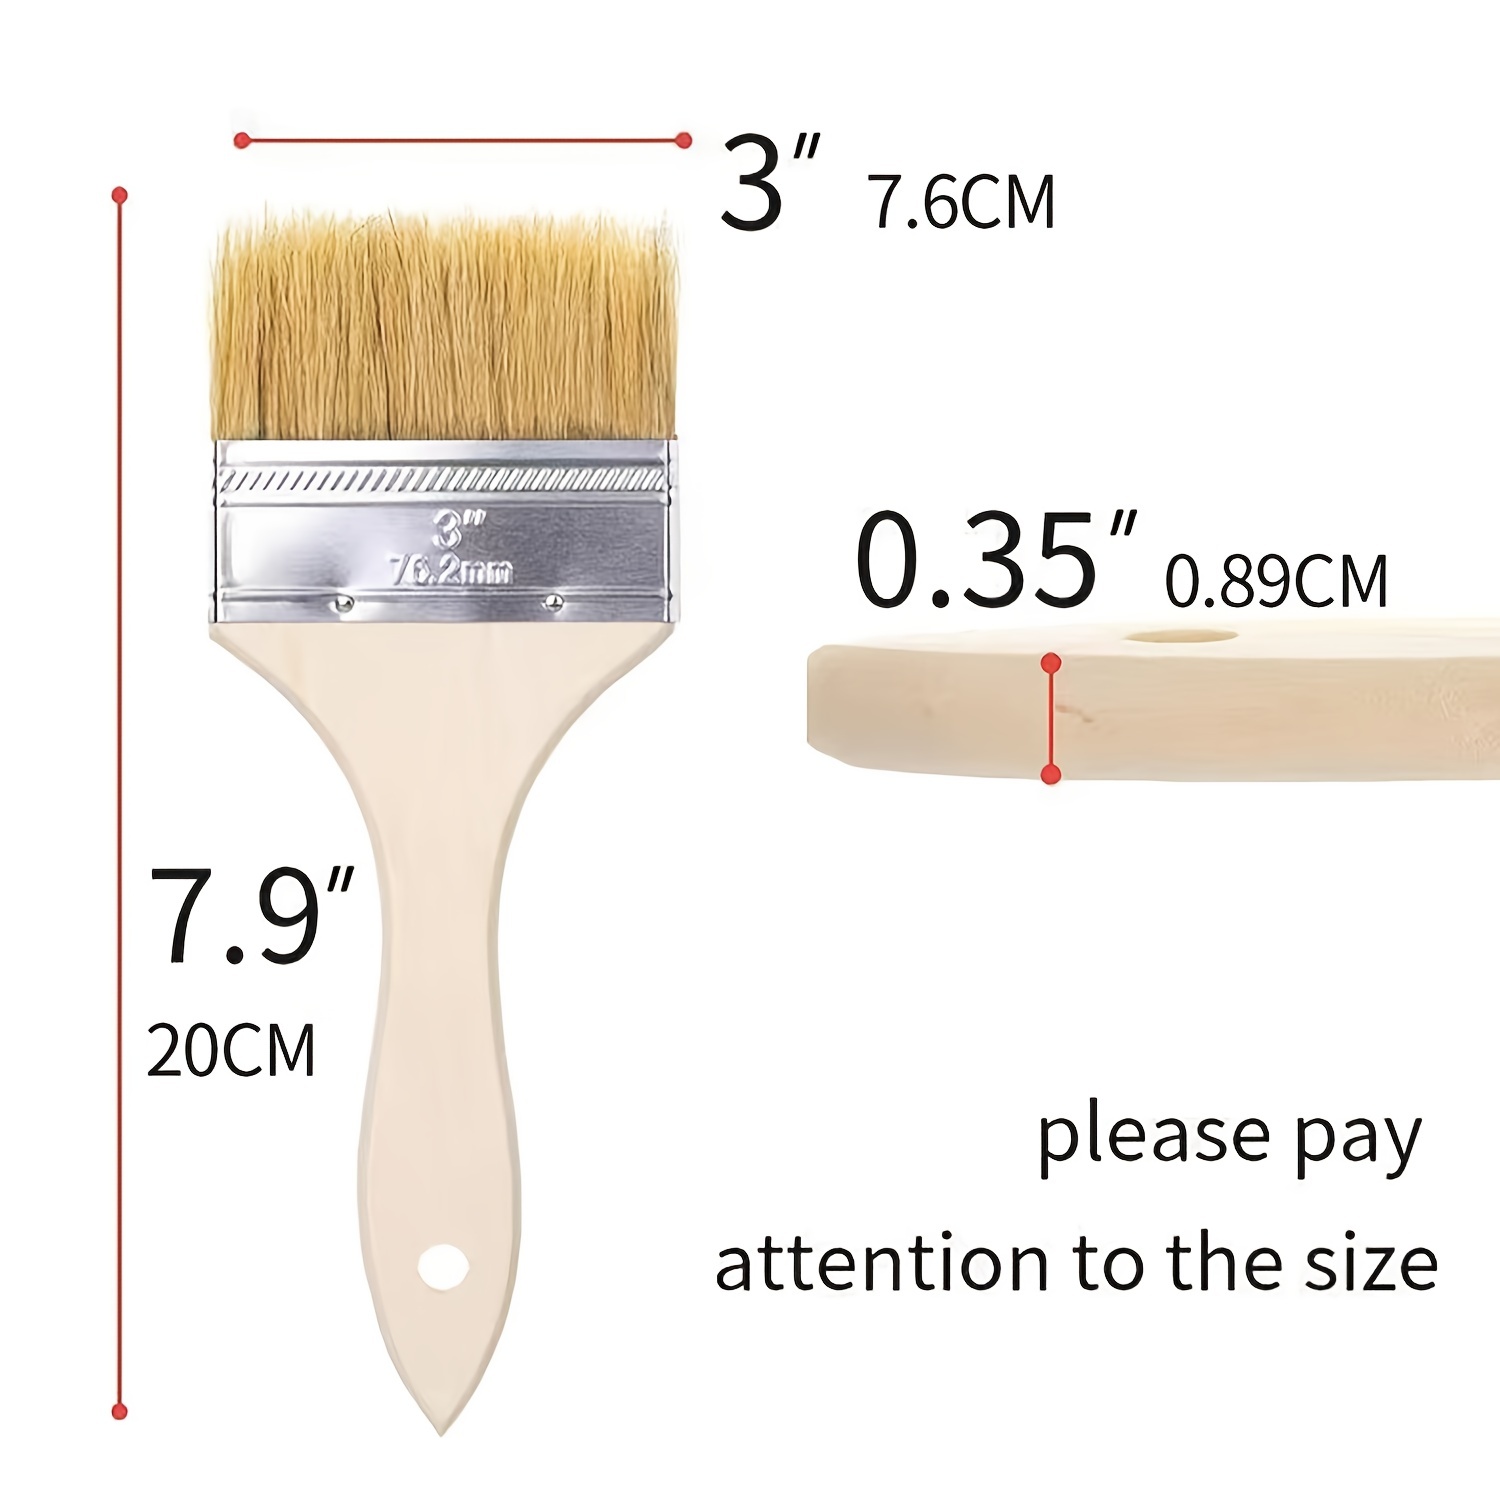 TAICHEUT 28 Pack 1 inch Paint Brush, Stain Paint Brush Chip Paint Brush for Painting, Coloring and DIY Crafts